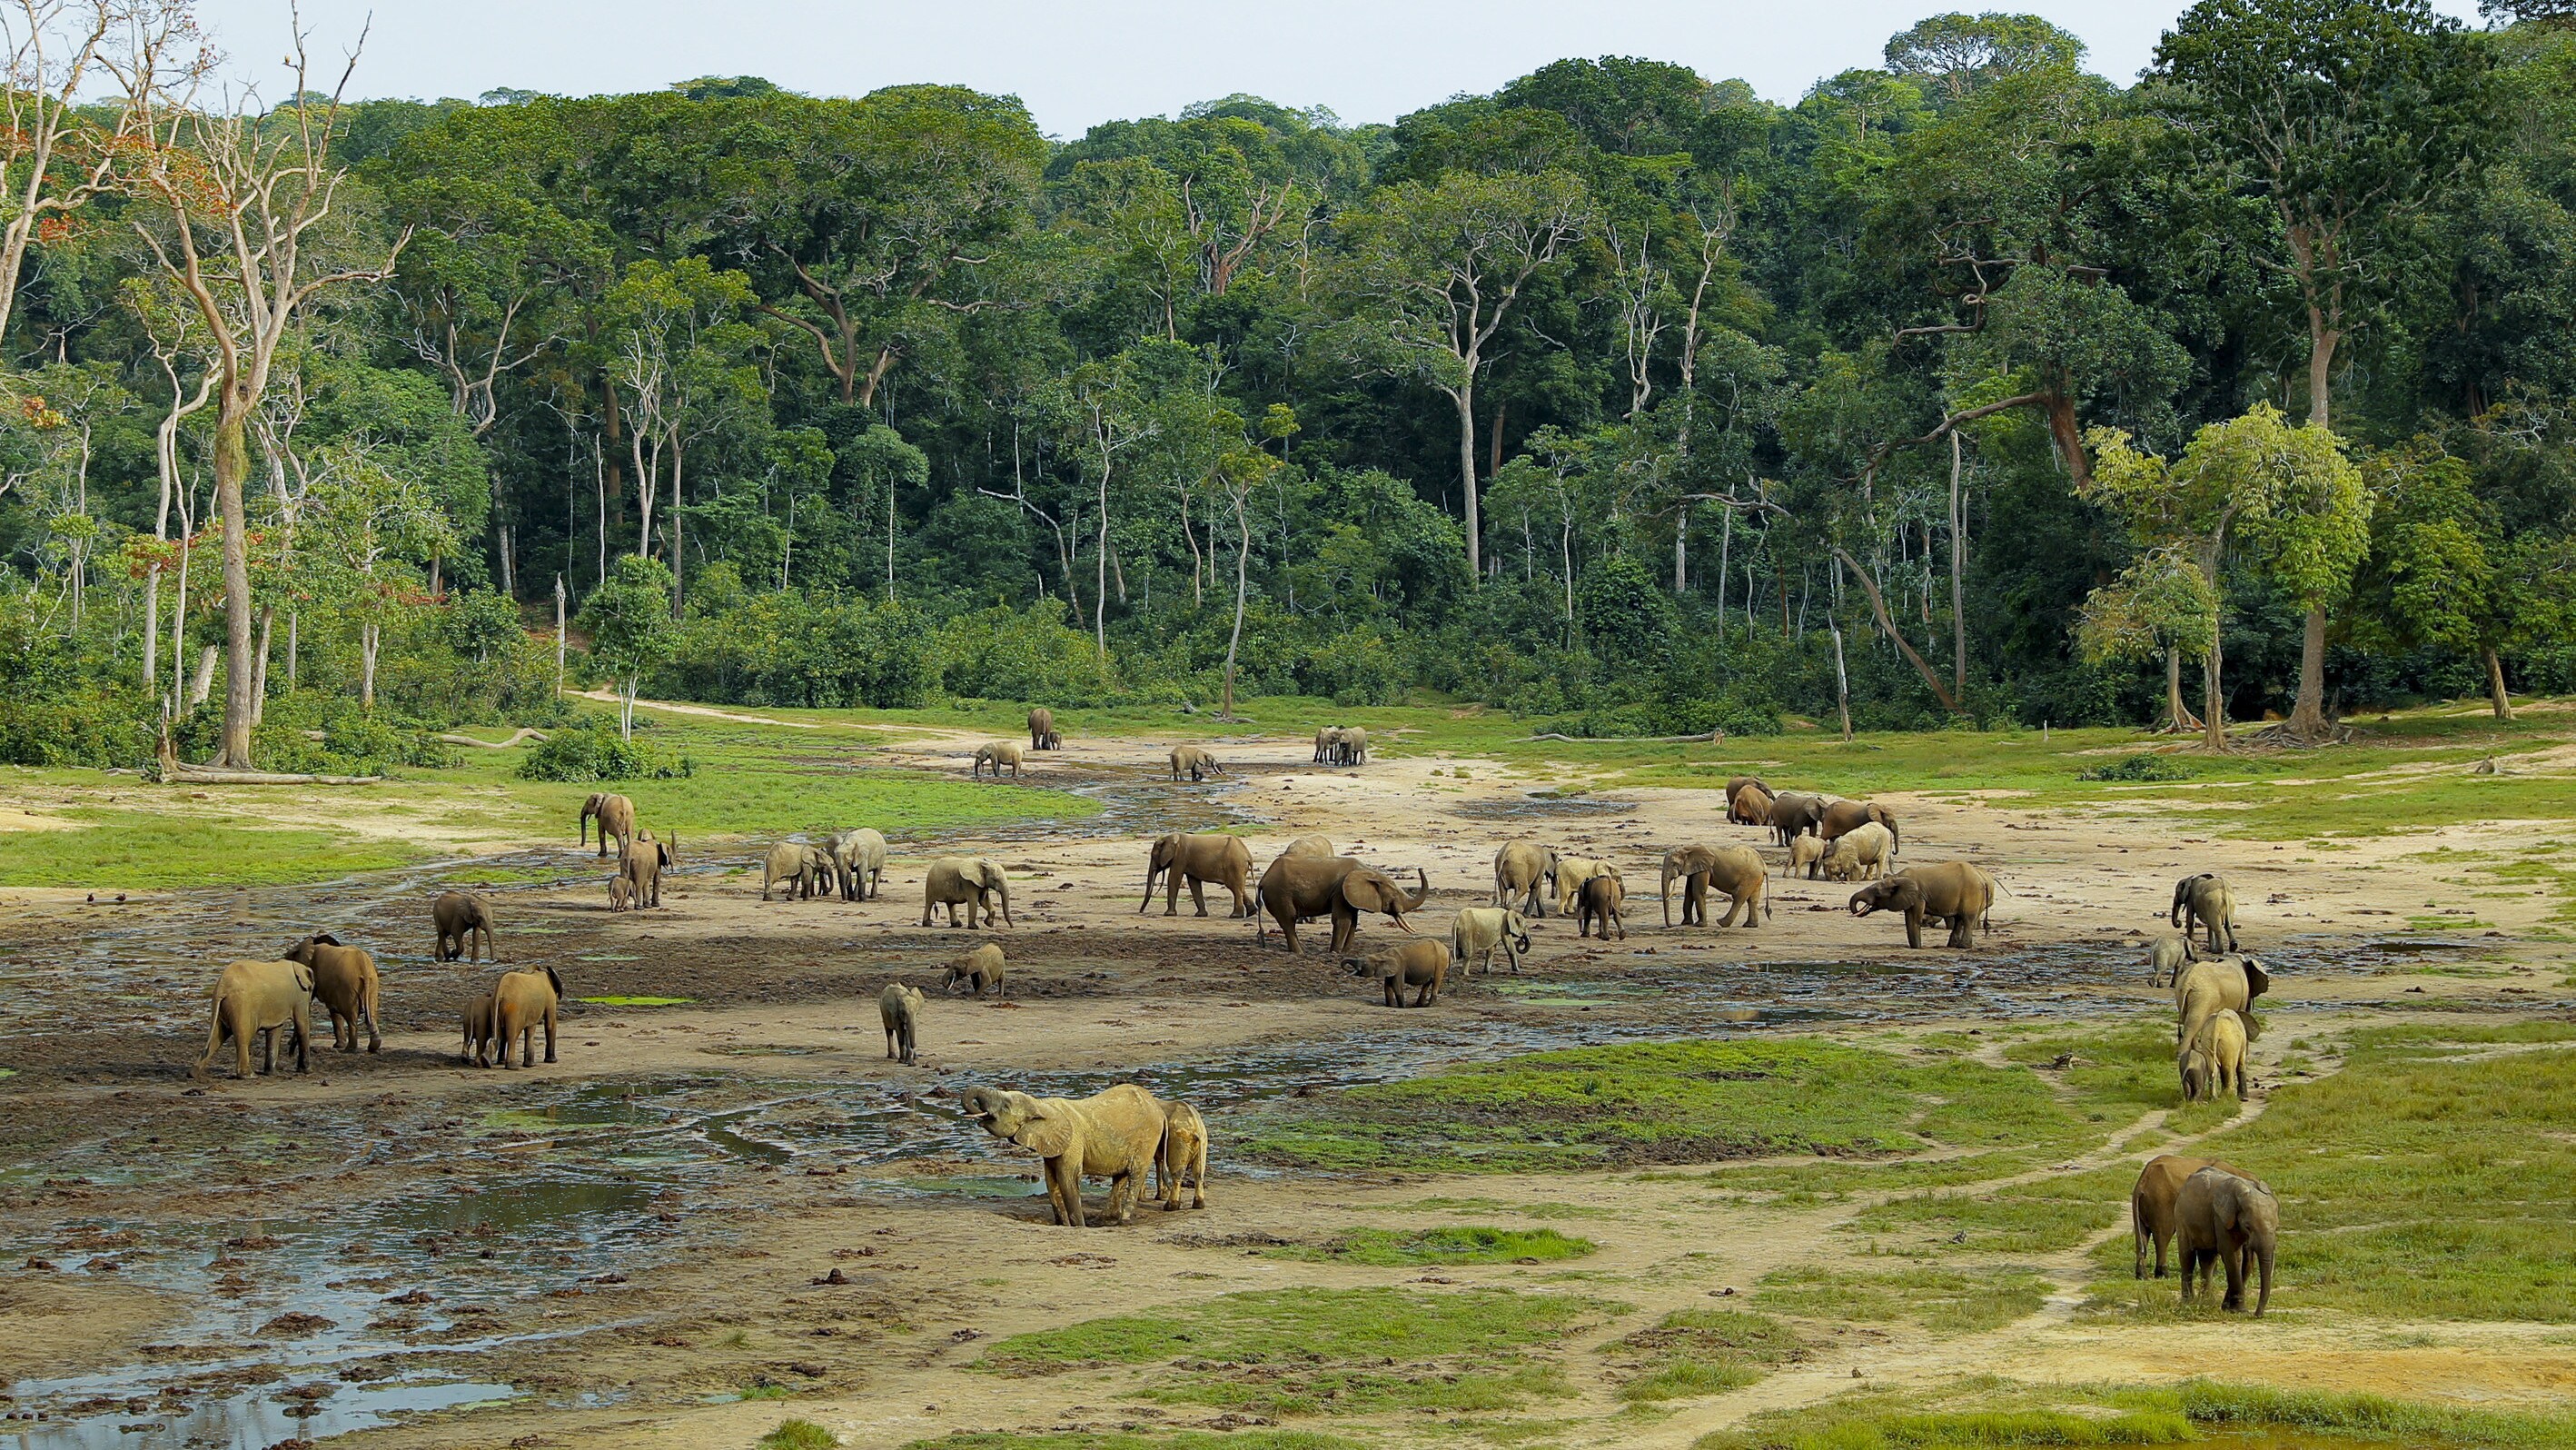 Forest elephants in the Bai. (National Geographic for Disney+/Waldo Etherington)